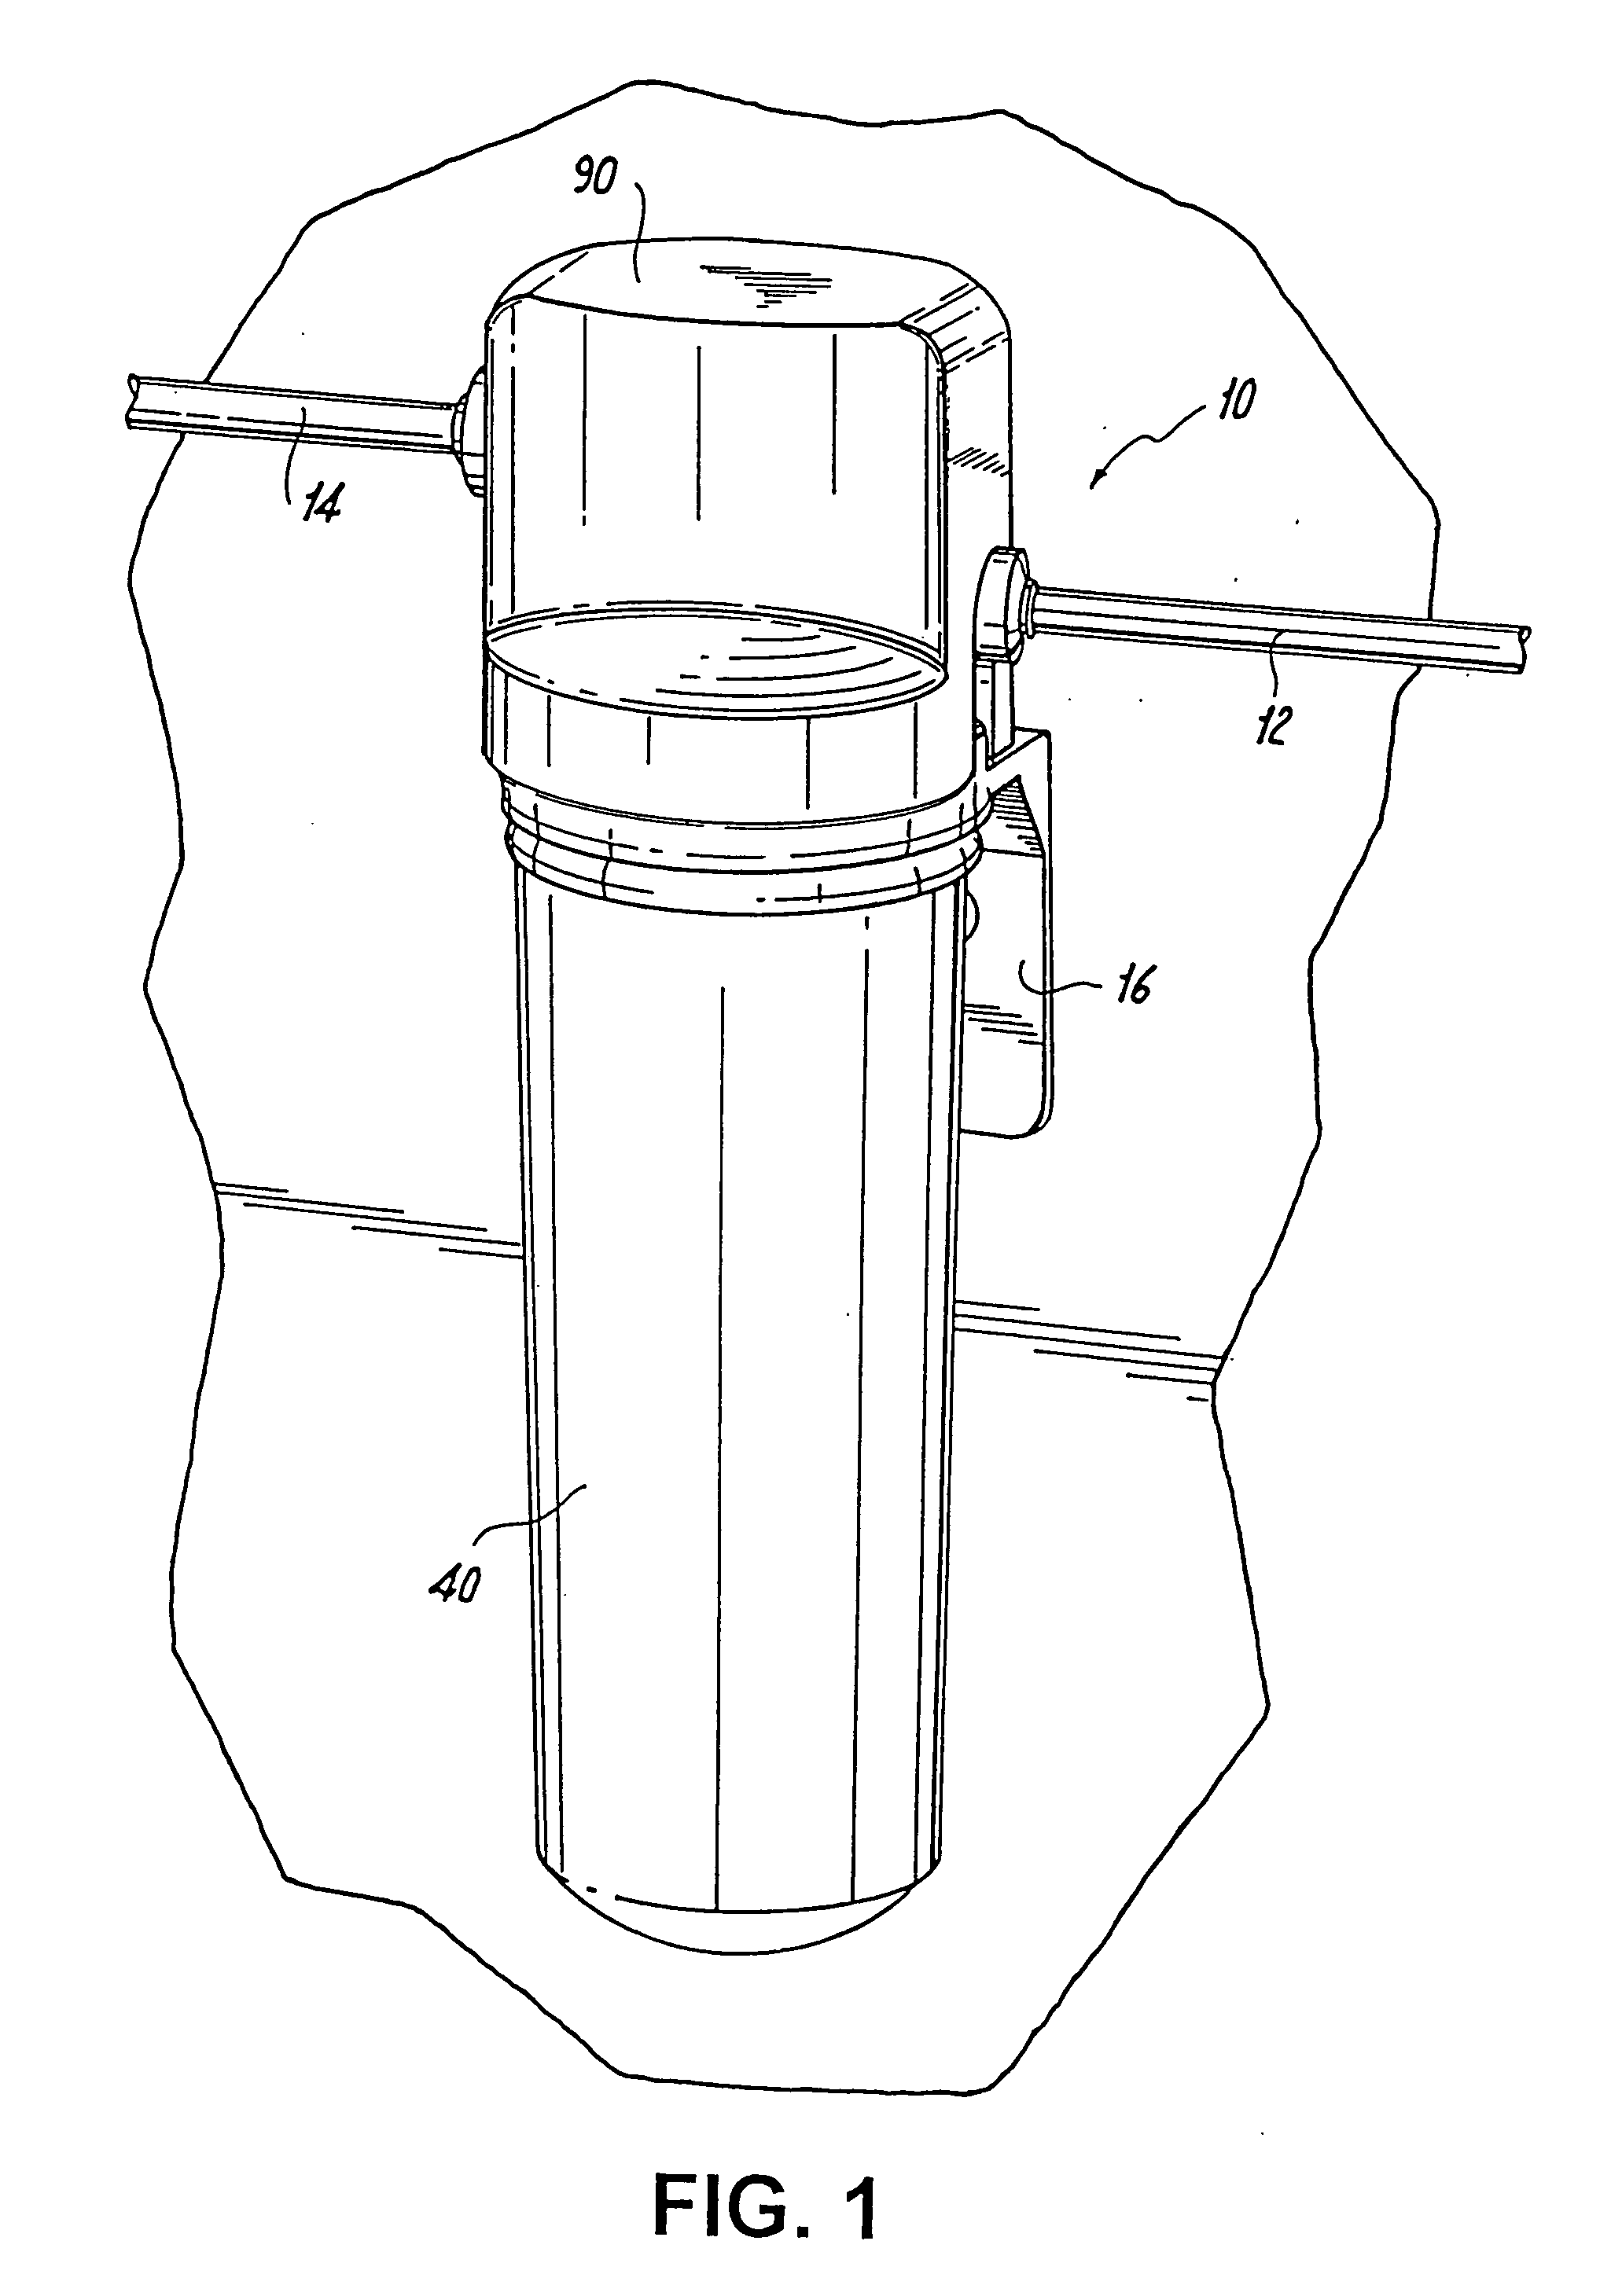 Rotary valve assembly for fluid filtration system